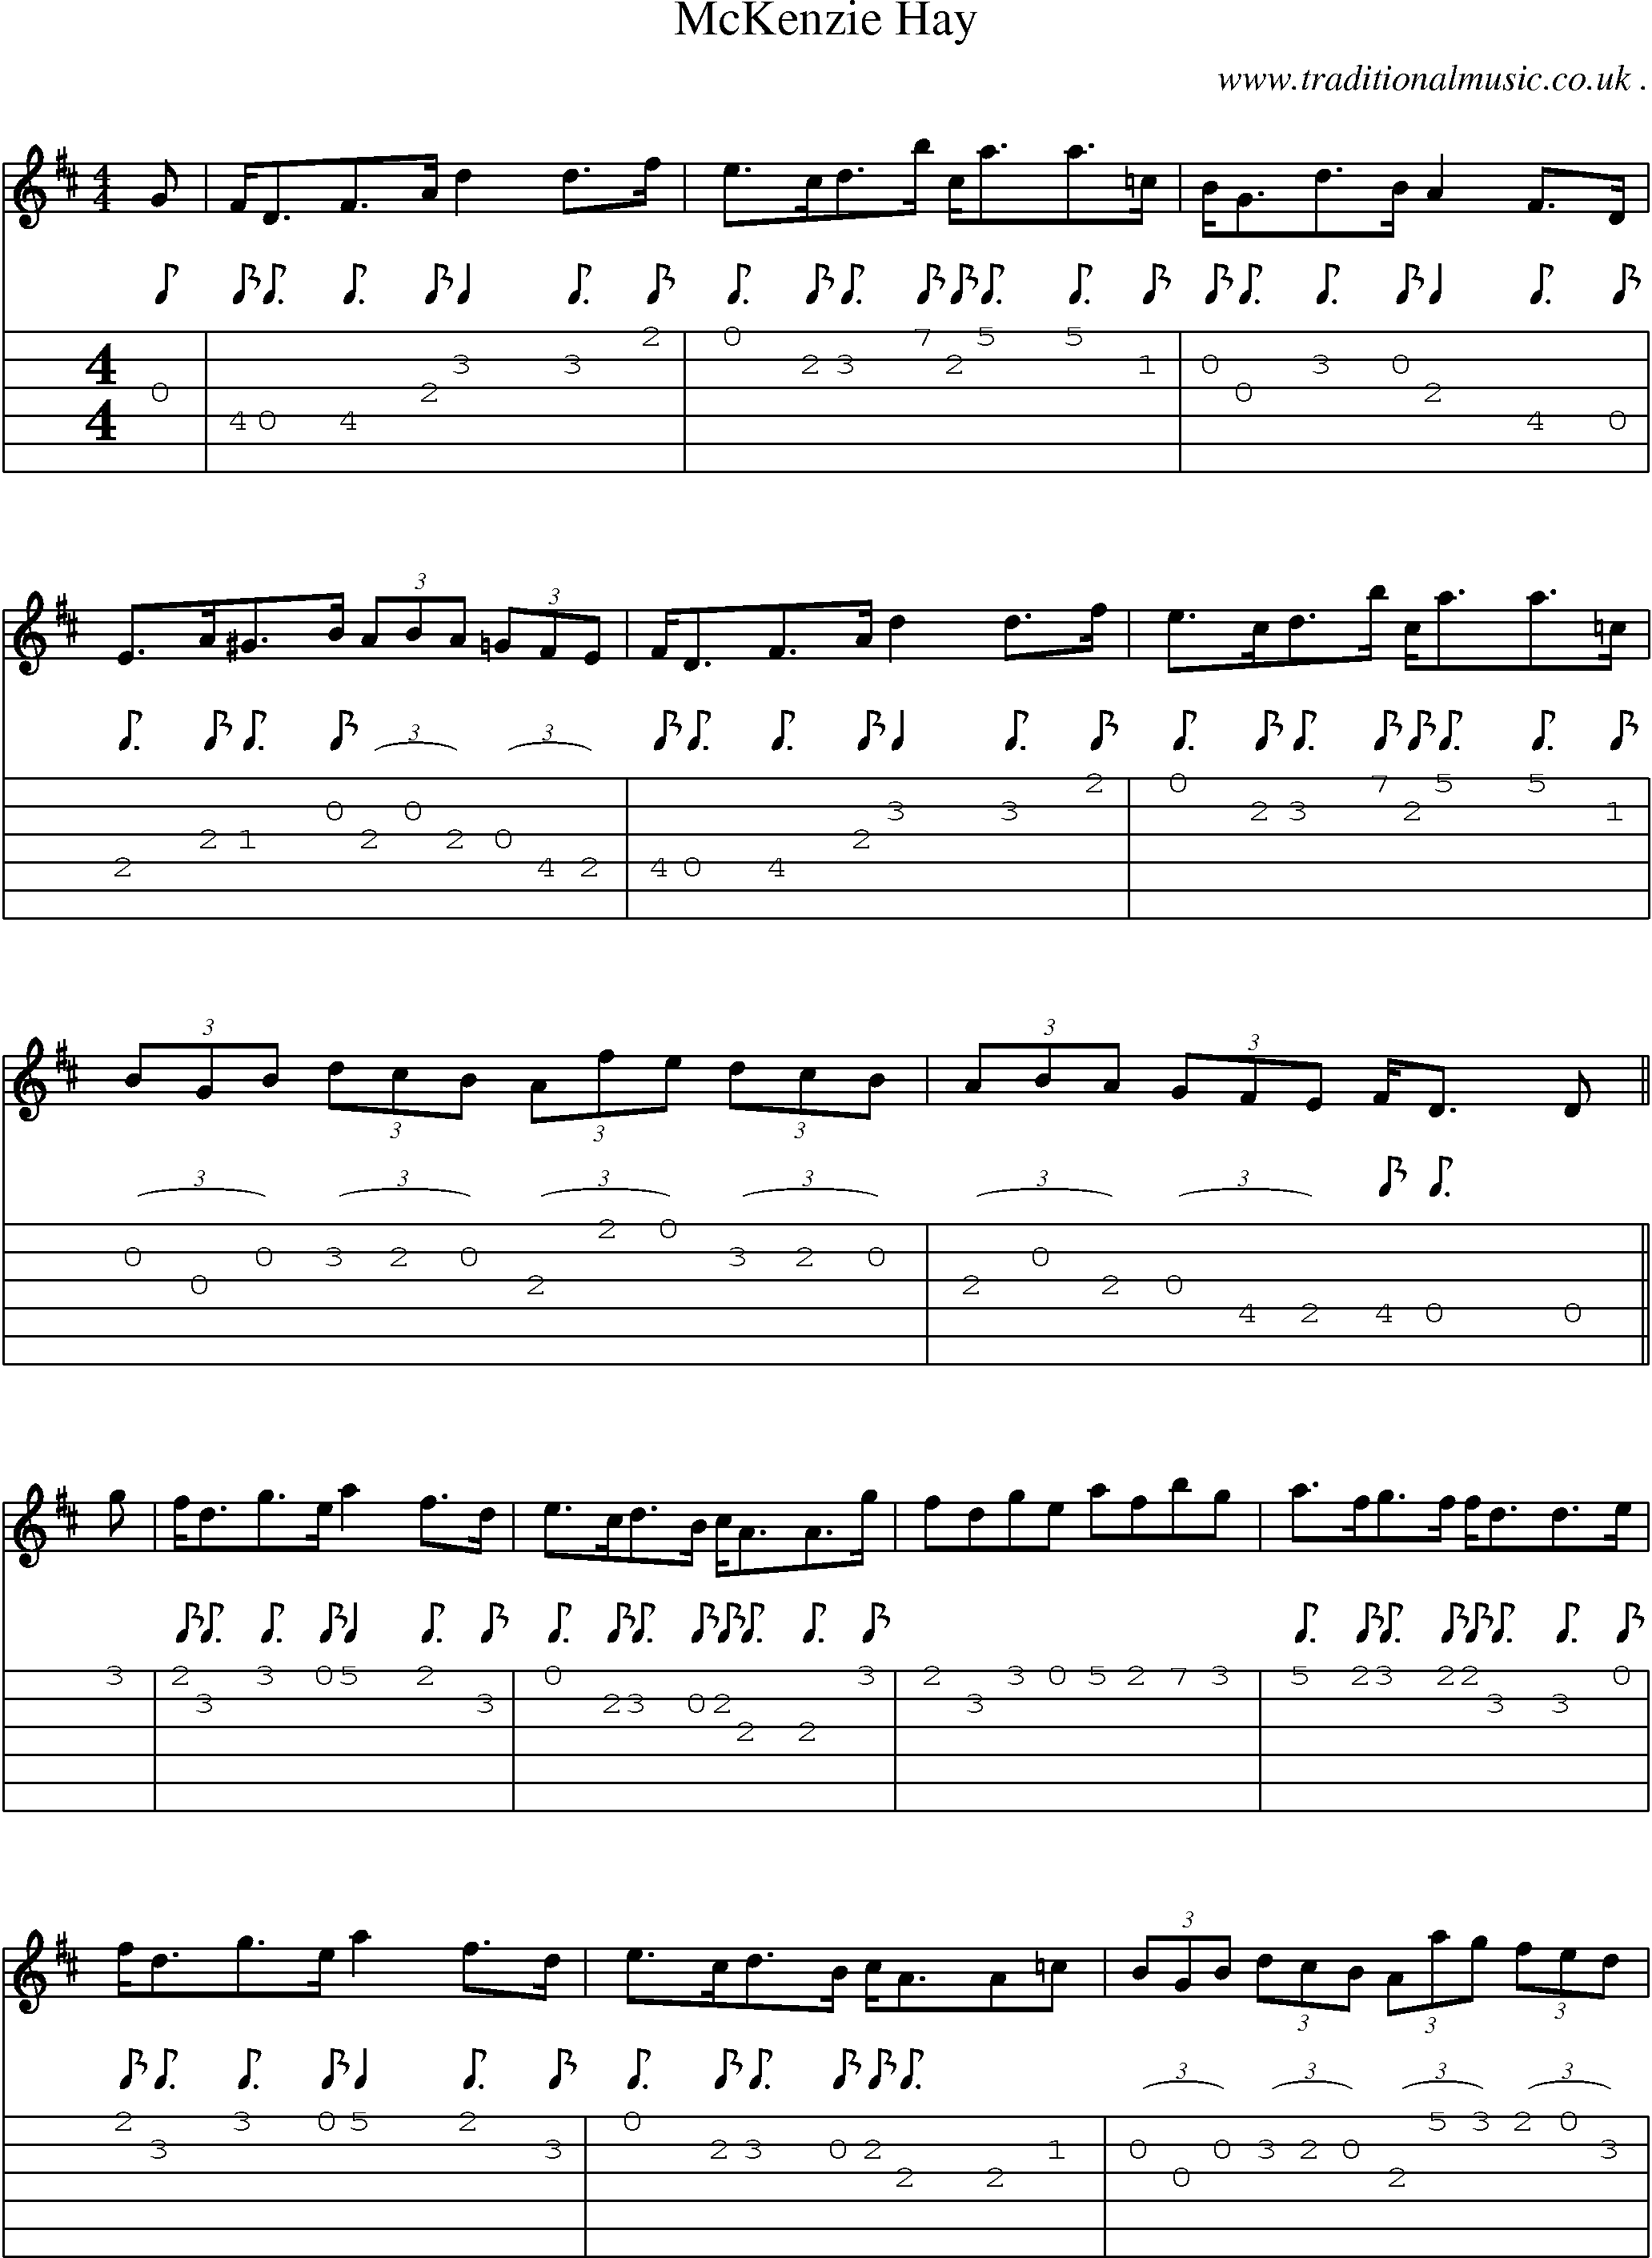 Sheet-Music and Guitar Tabs for Mckenzie Hay